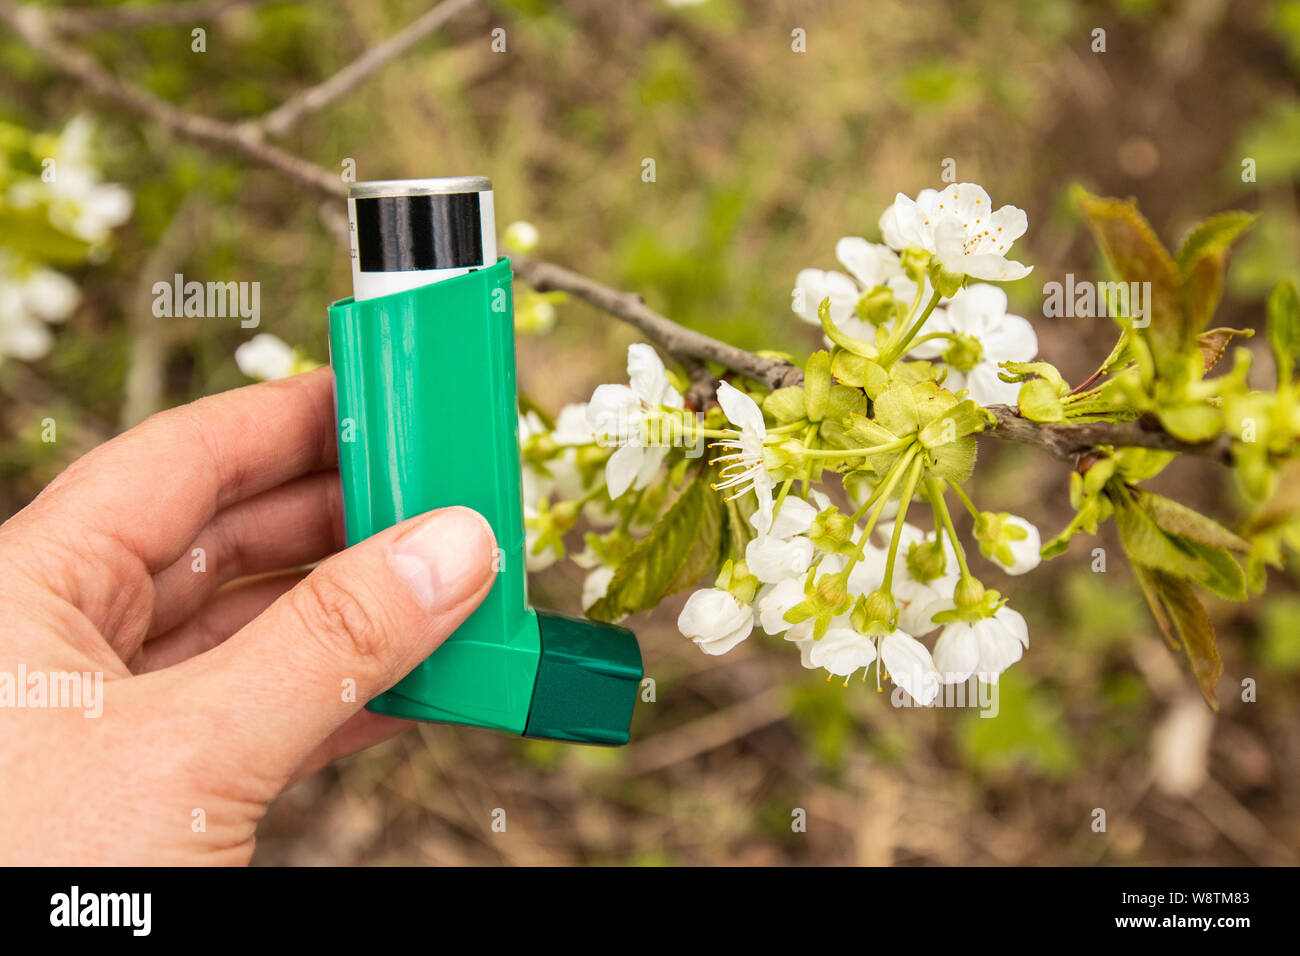 Asthma and COPD disease concept. Pharmaceutical products is used to prevent and treat wheezing and shortness of breath caused asthma. Spring flowering Stock Photo